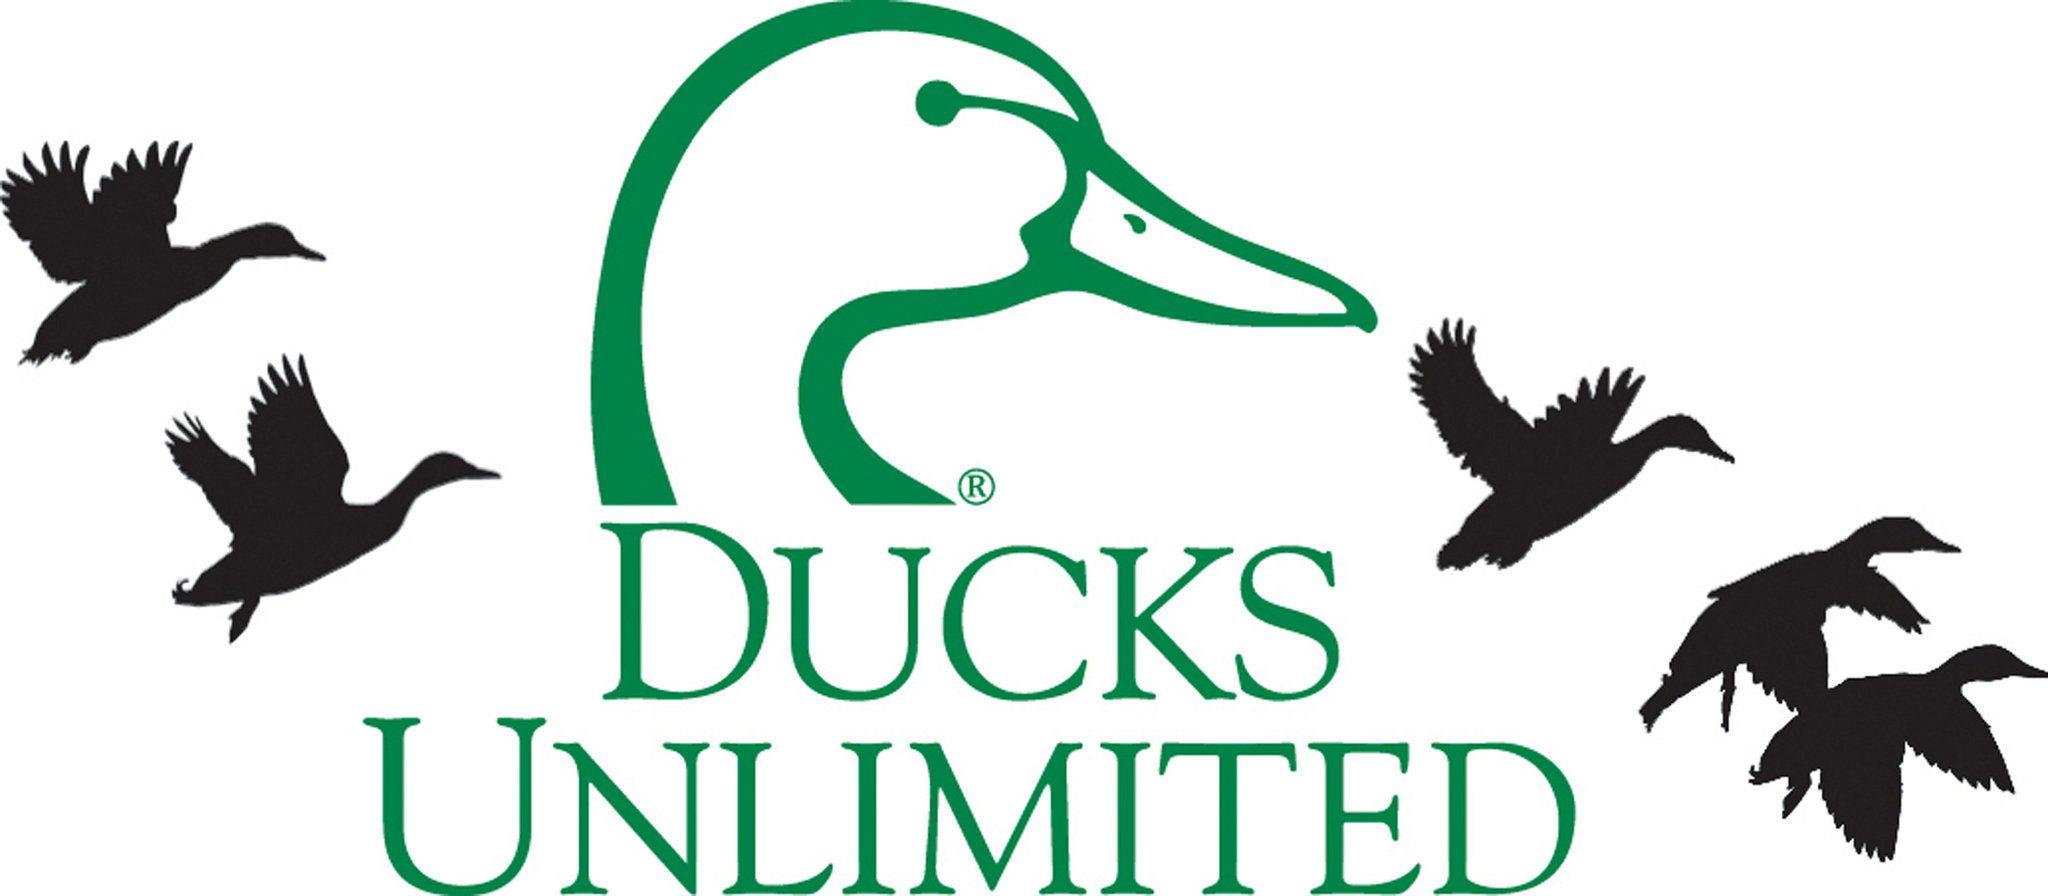 Ducks Unlimited Logo - Ducks Unlimited banquet fundraiser helps to preserve environment